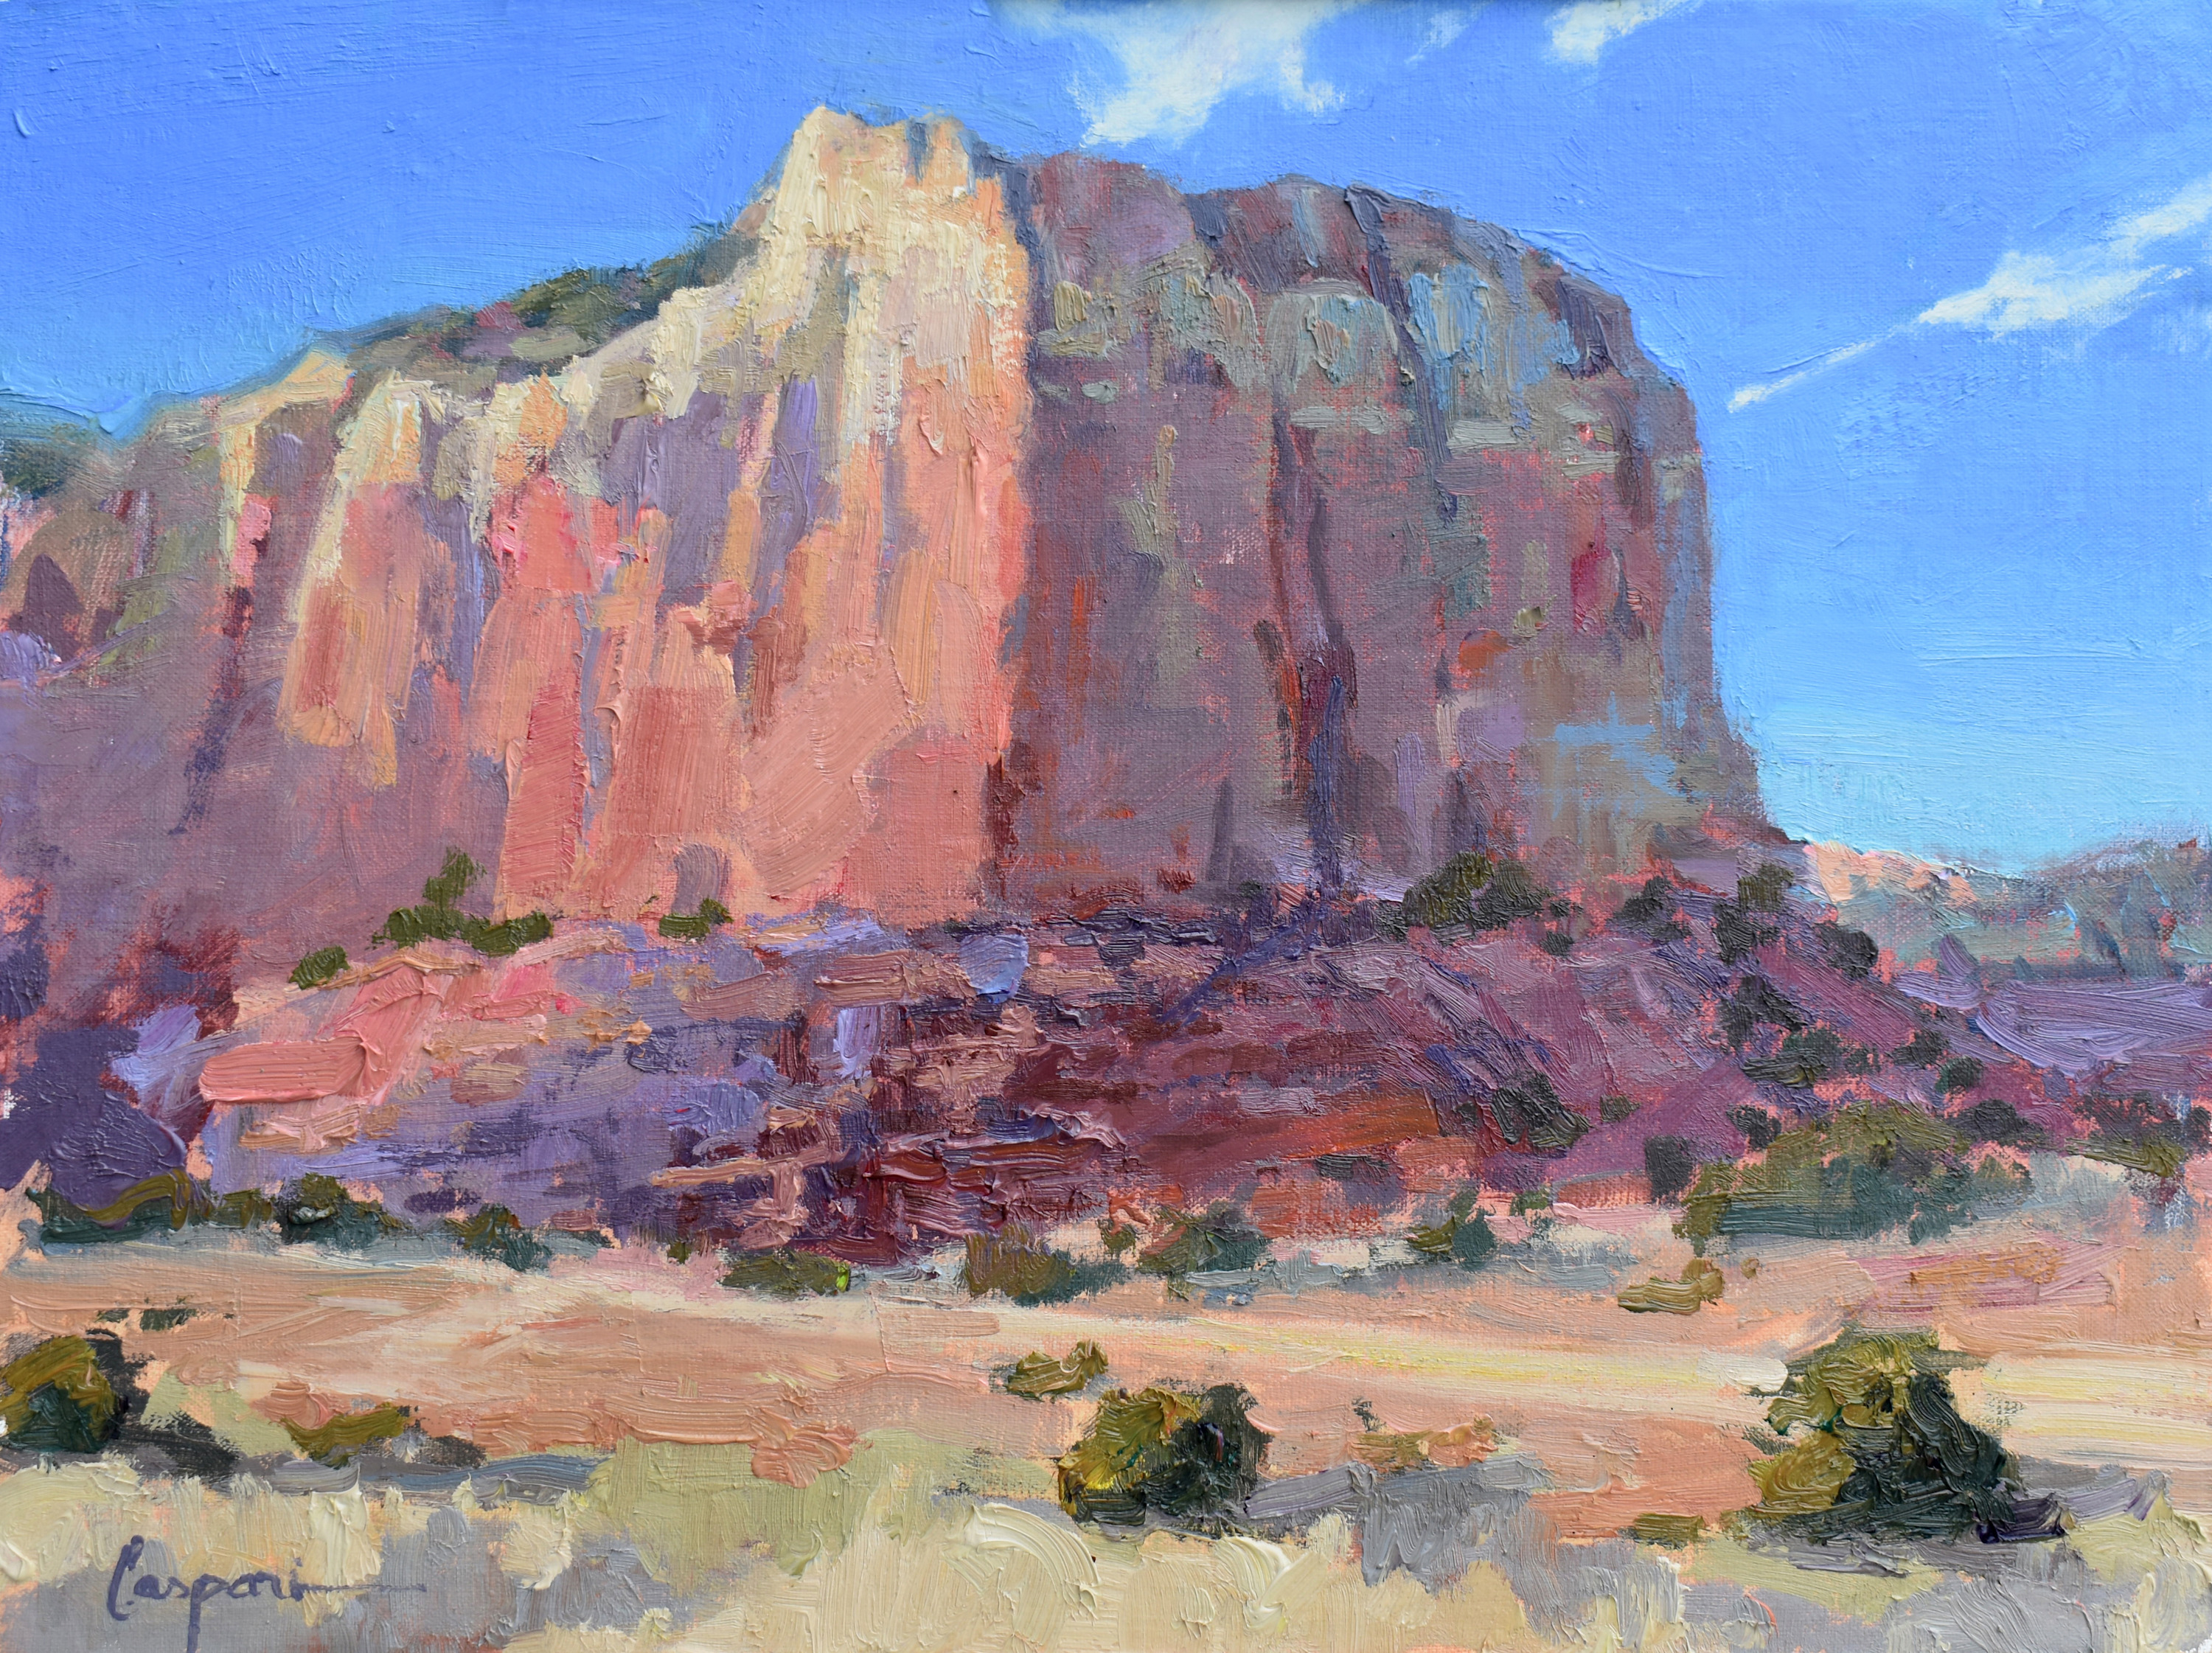 Ghost ranch monument 16 22x12 22 oil 2013 zrnjoo